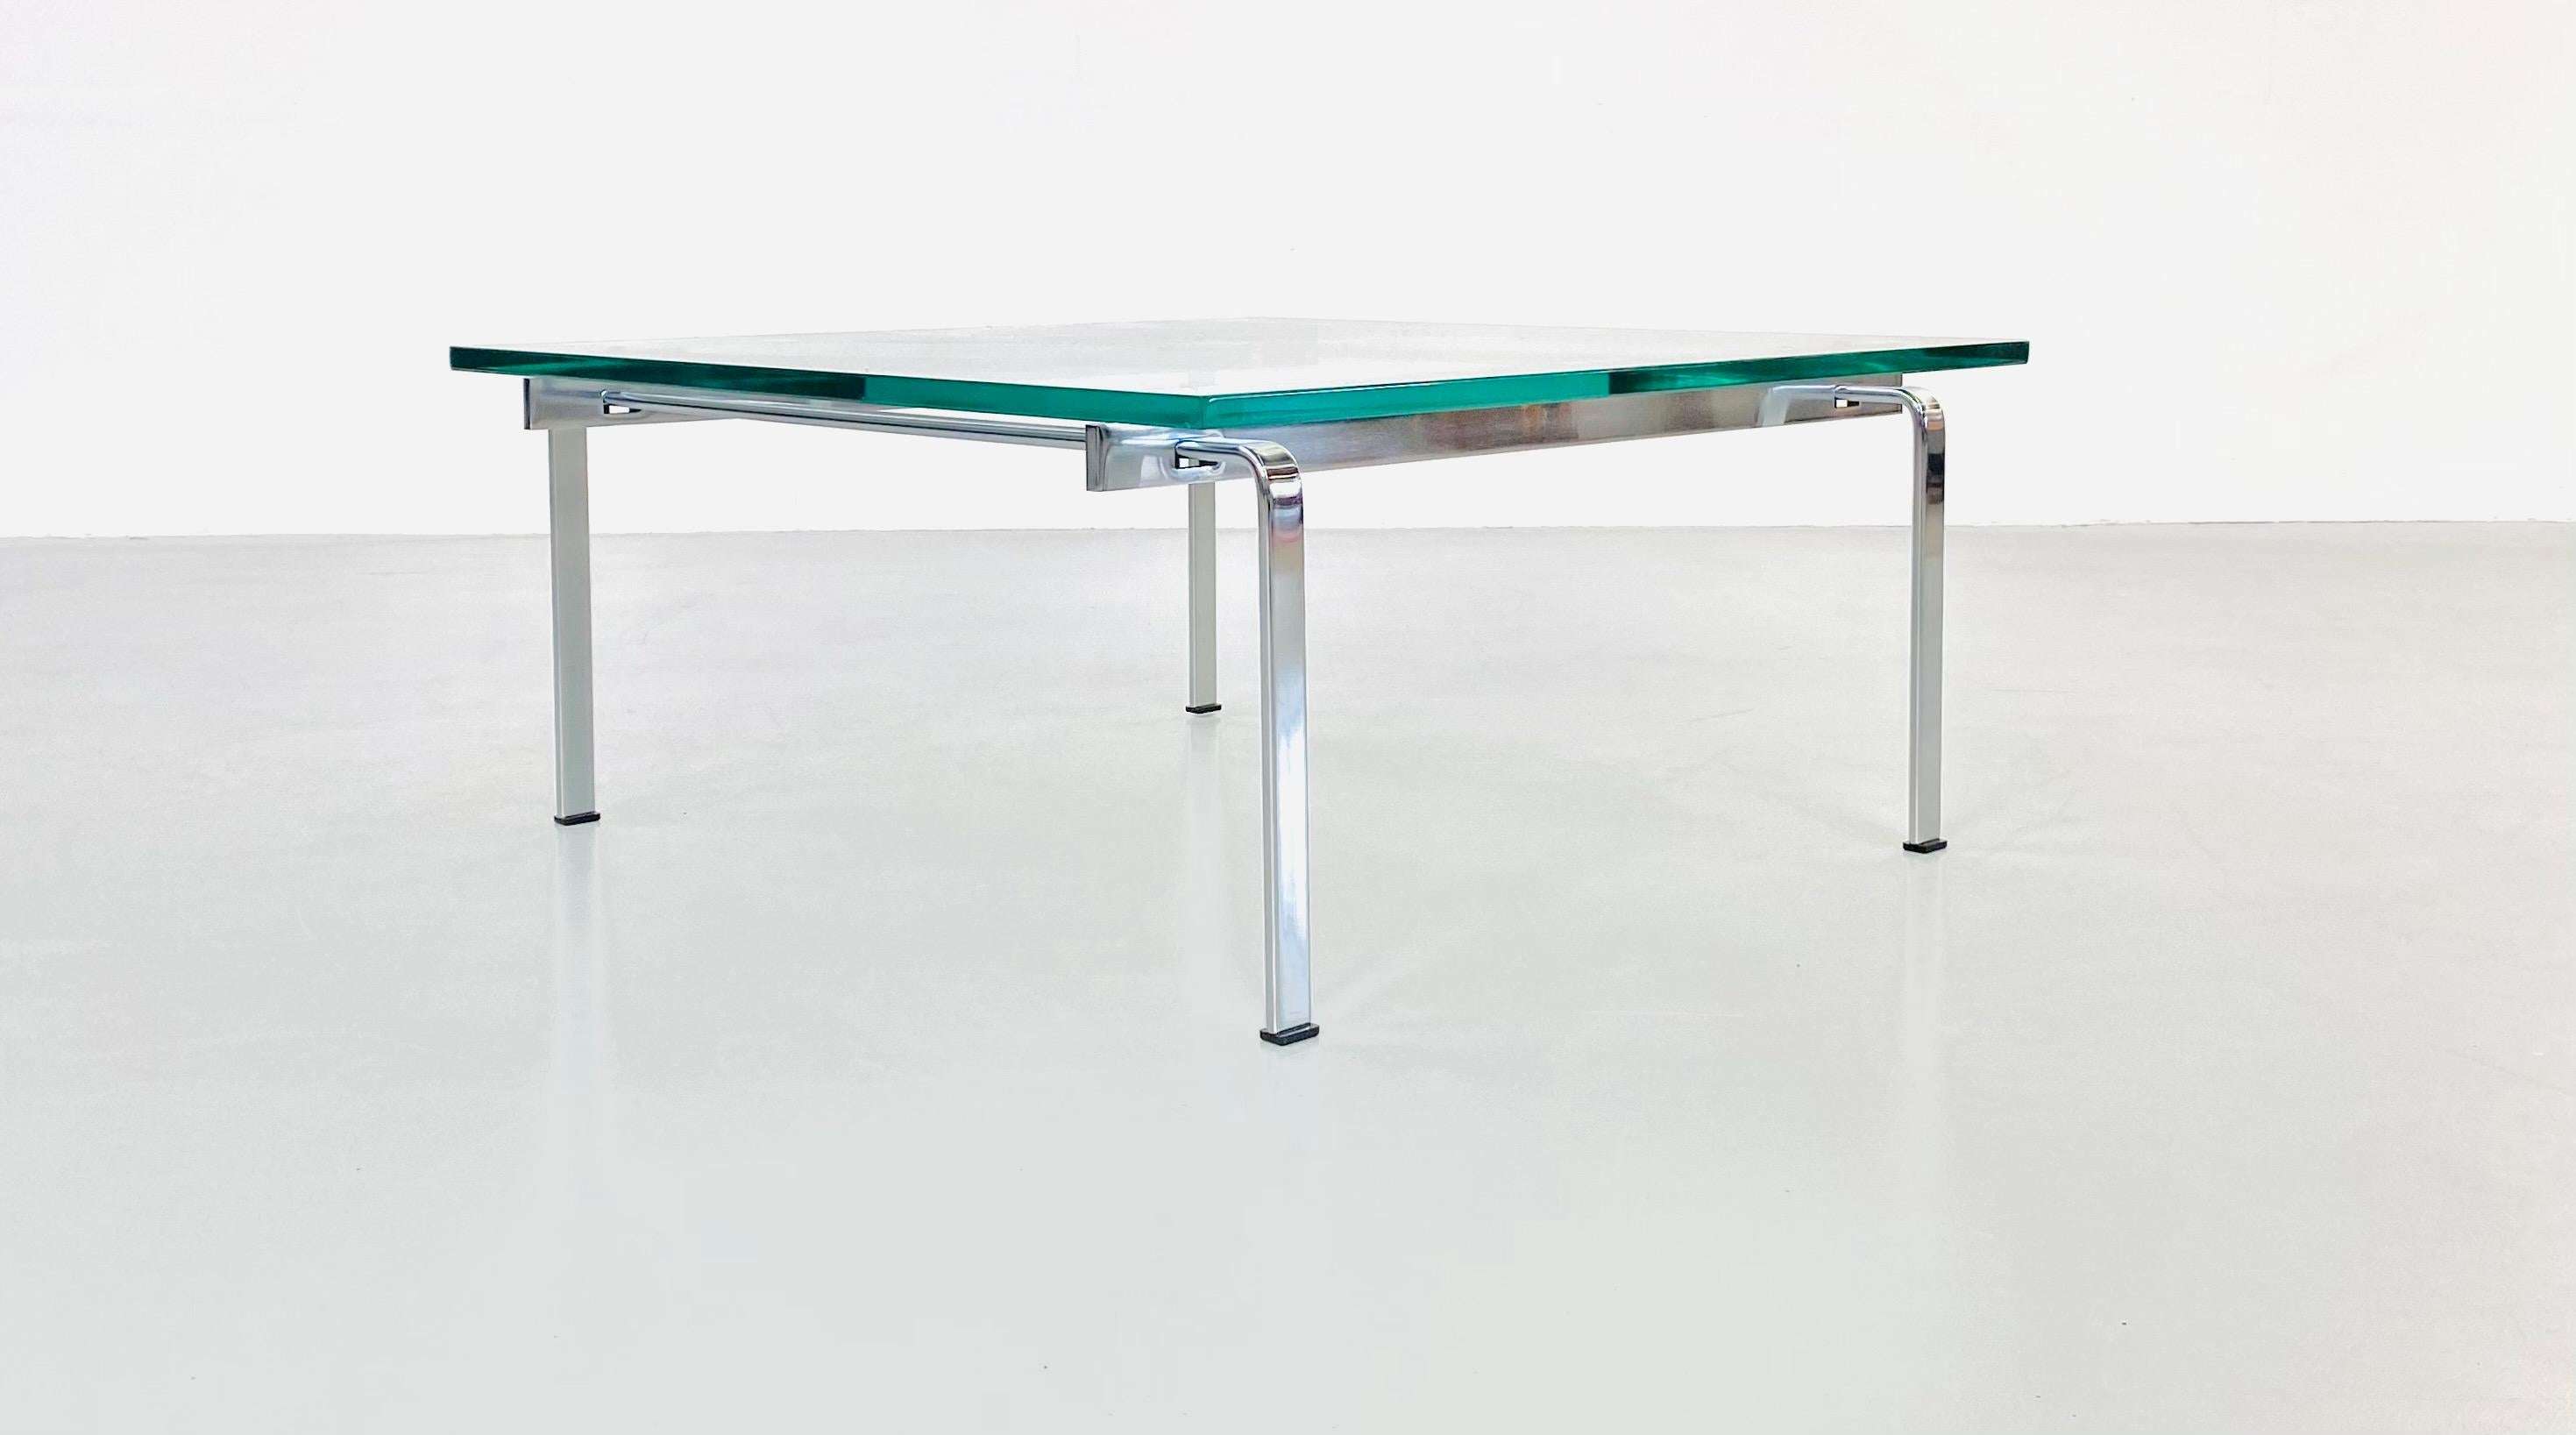 This glass and flat steel table is was designed by Preben Fabricius (1931-1984) and Jørgen Kastholm (1931-2007). Together they started a design studio, Fabricius & Kastholm in 1961. These two Danish designers focussed on creating timeless functional